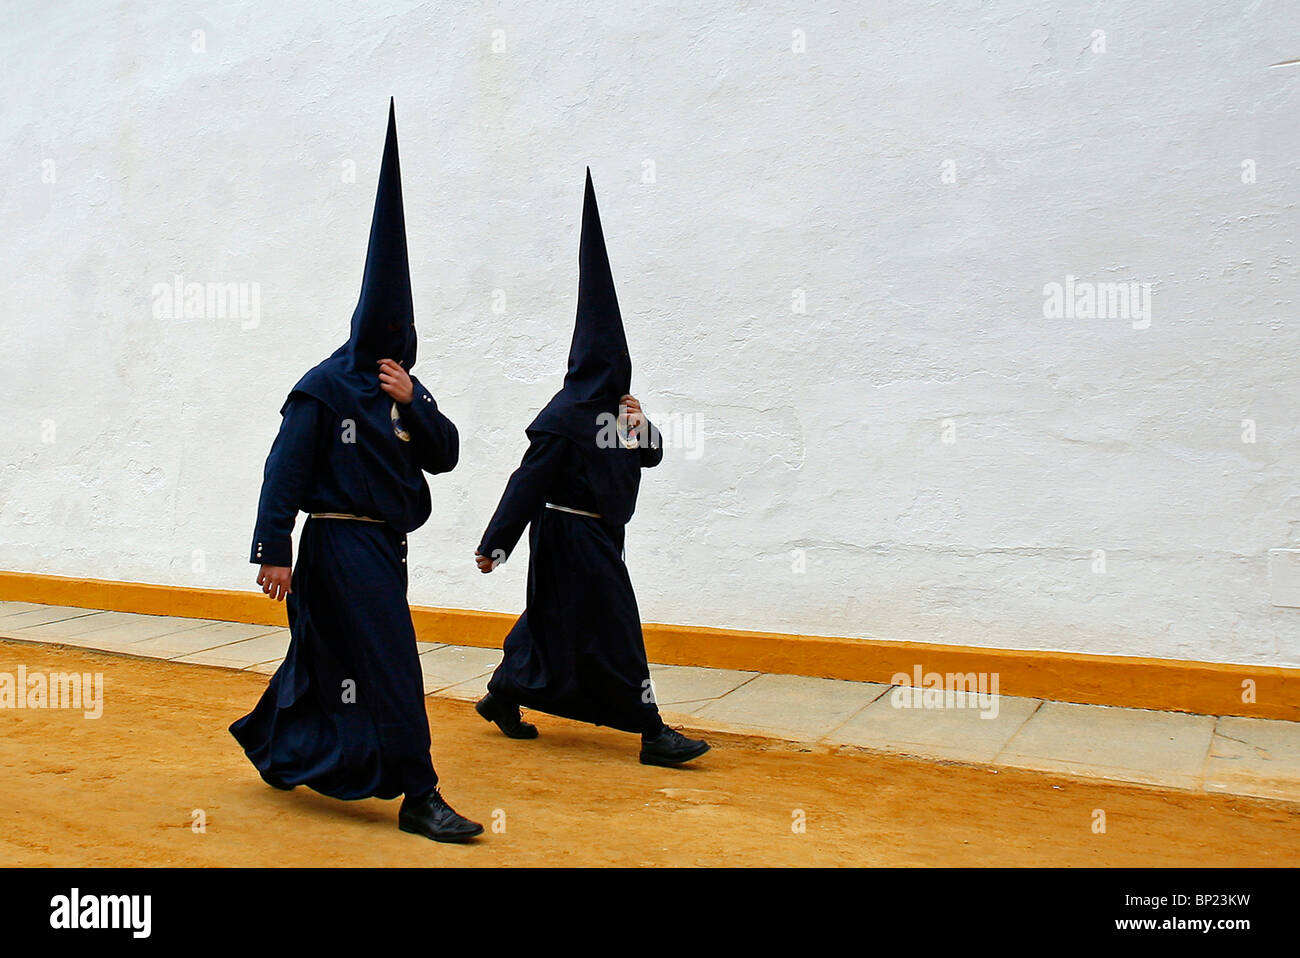 Hooded members of a Brotherhood walk during the Semana Santa processions in Seville, southern Spain on April 4, 2007. Stock Photo